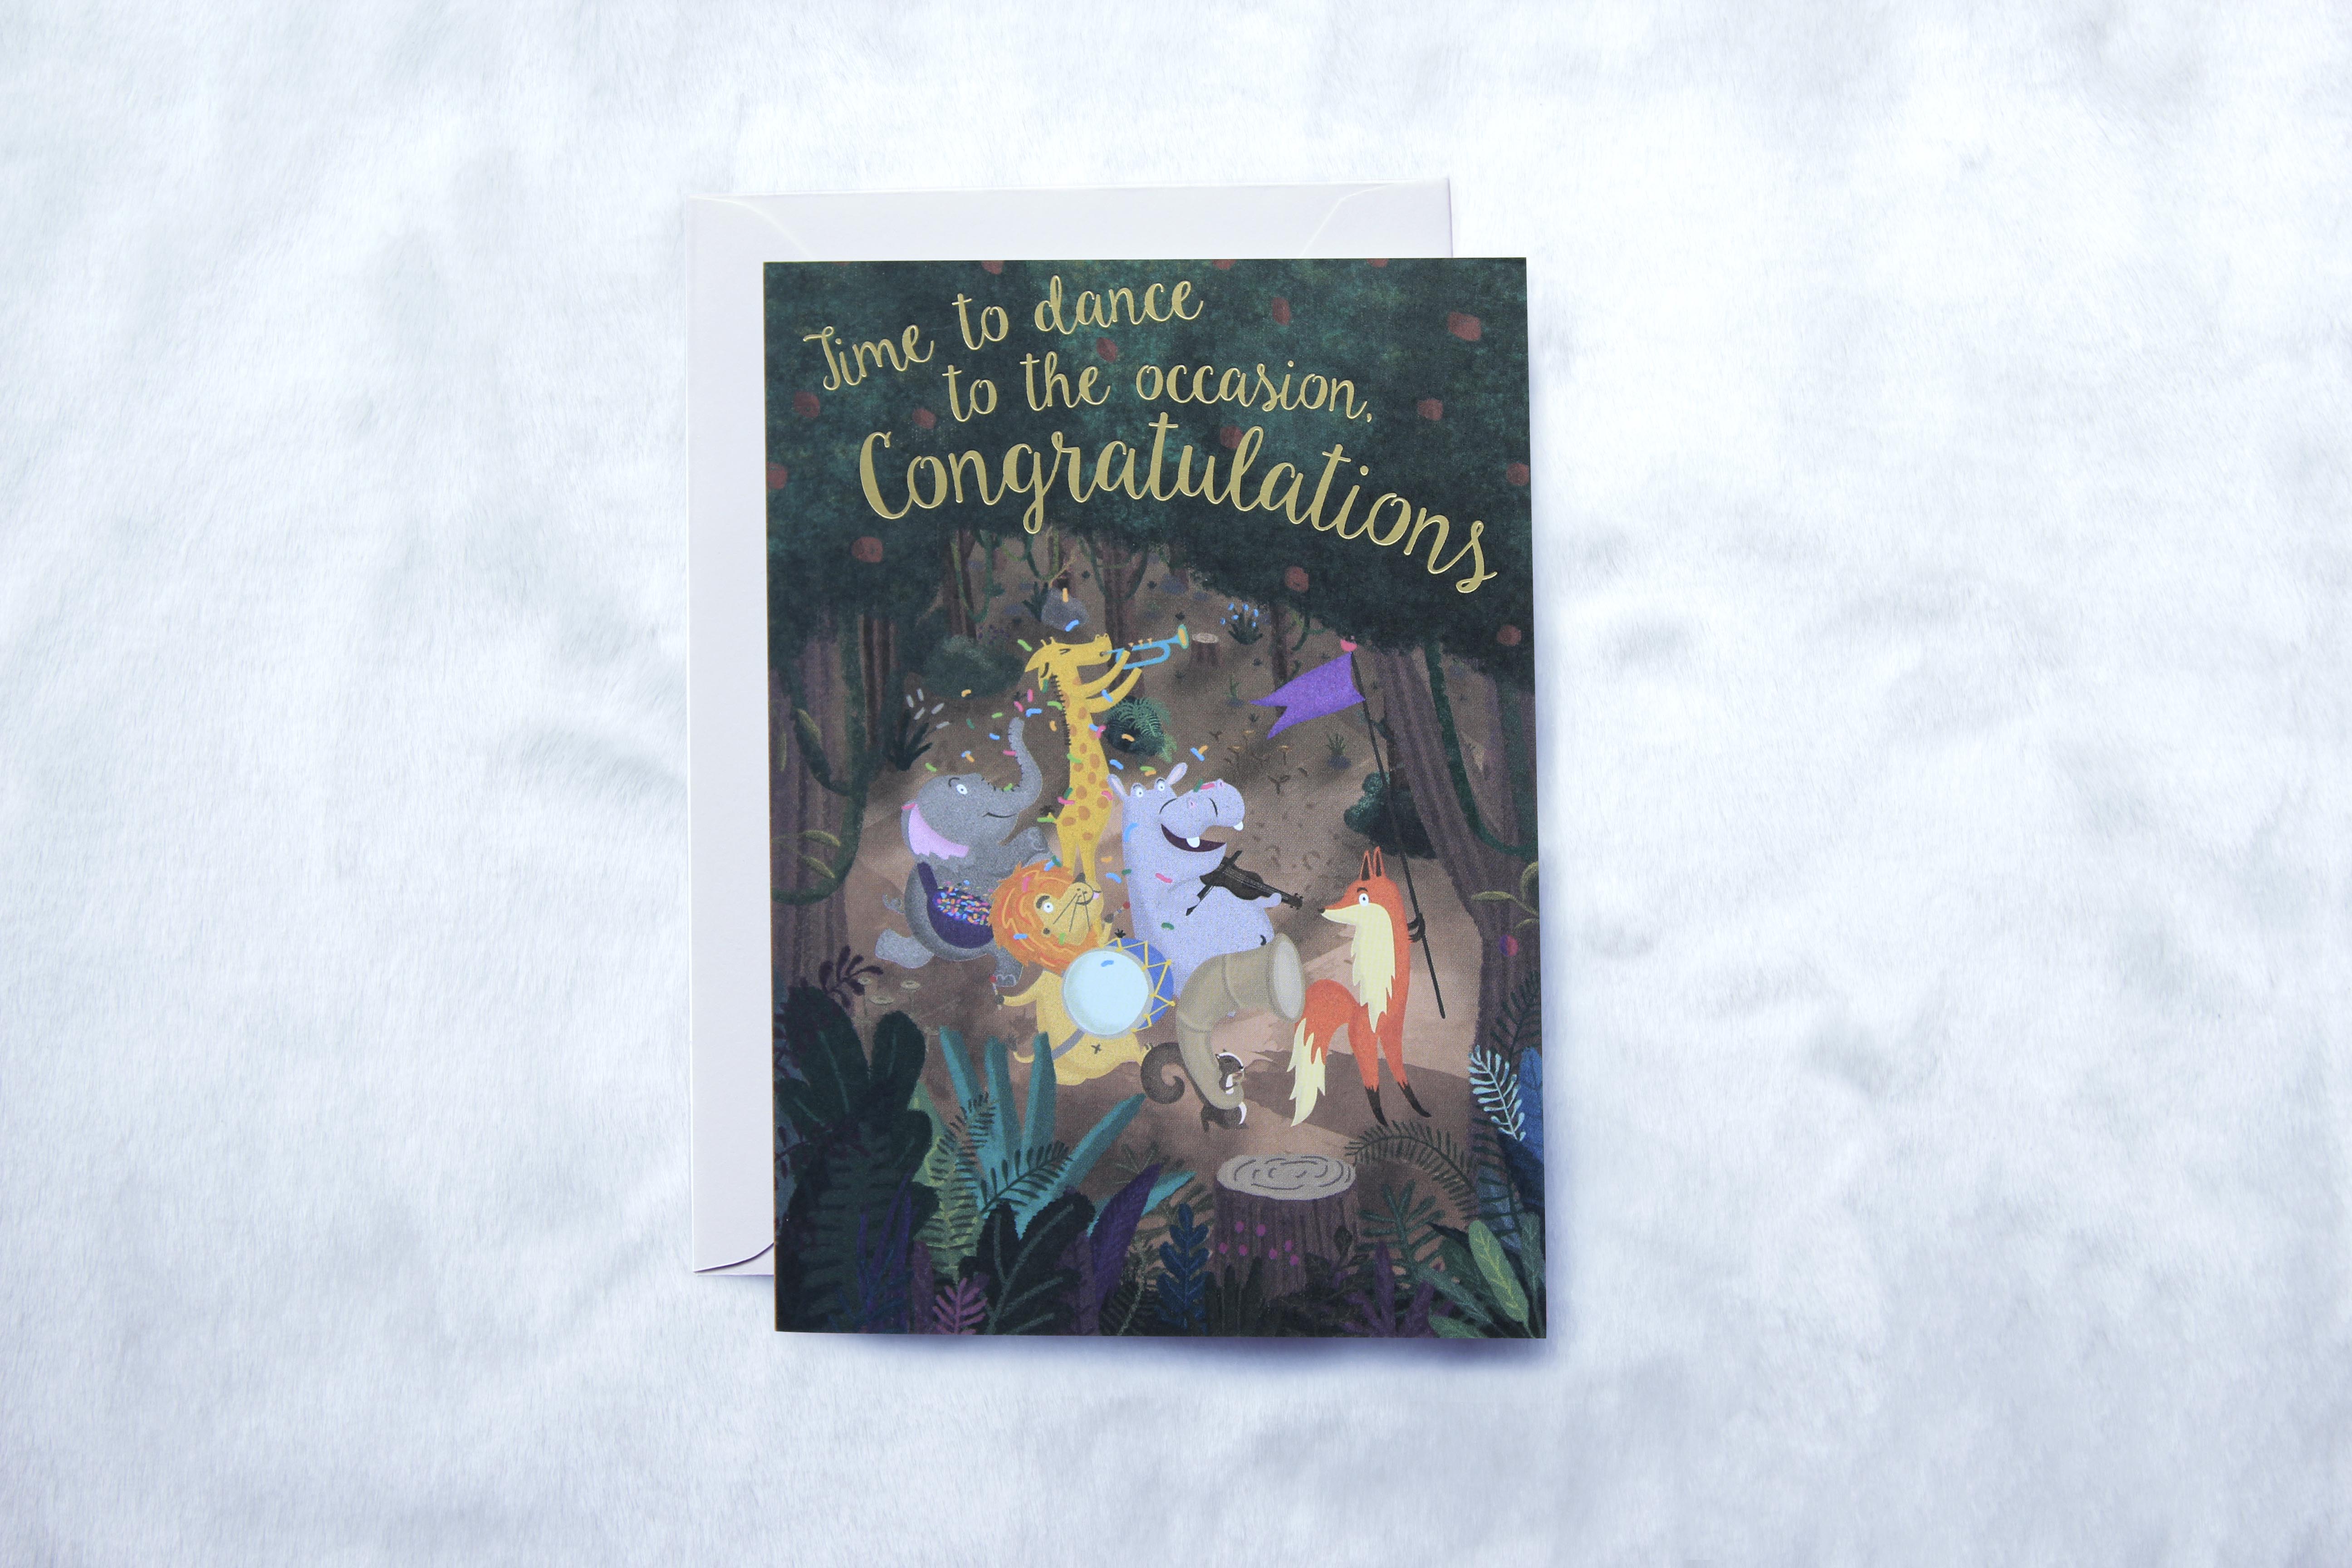 20151030_pencilled_Greeting_Cards_Series1_Congratulations_DI_downsized_R1